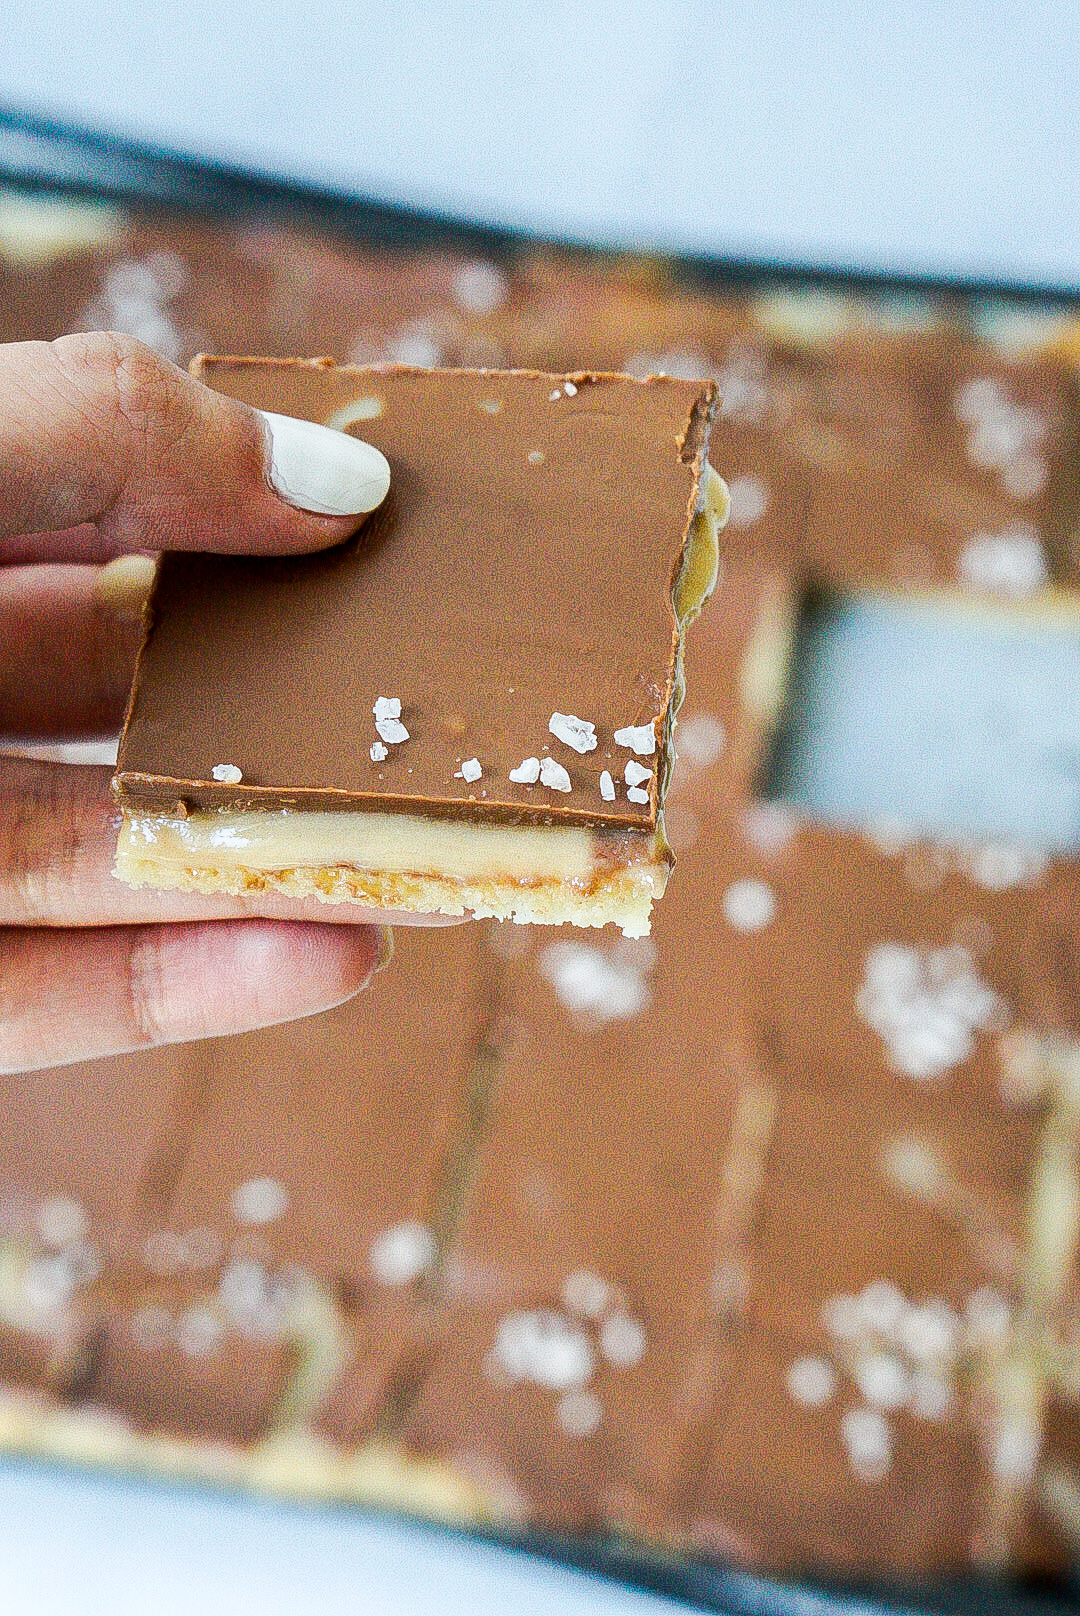 Delicious homemade millionaire shortbread with a layer of caramel and chocolate topping.